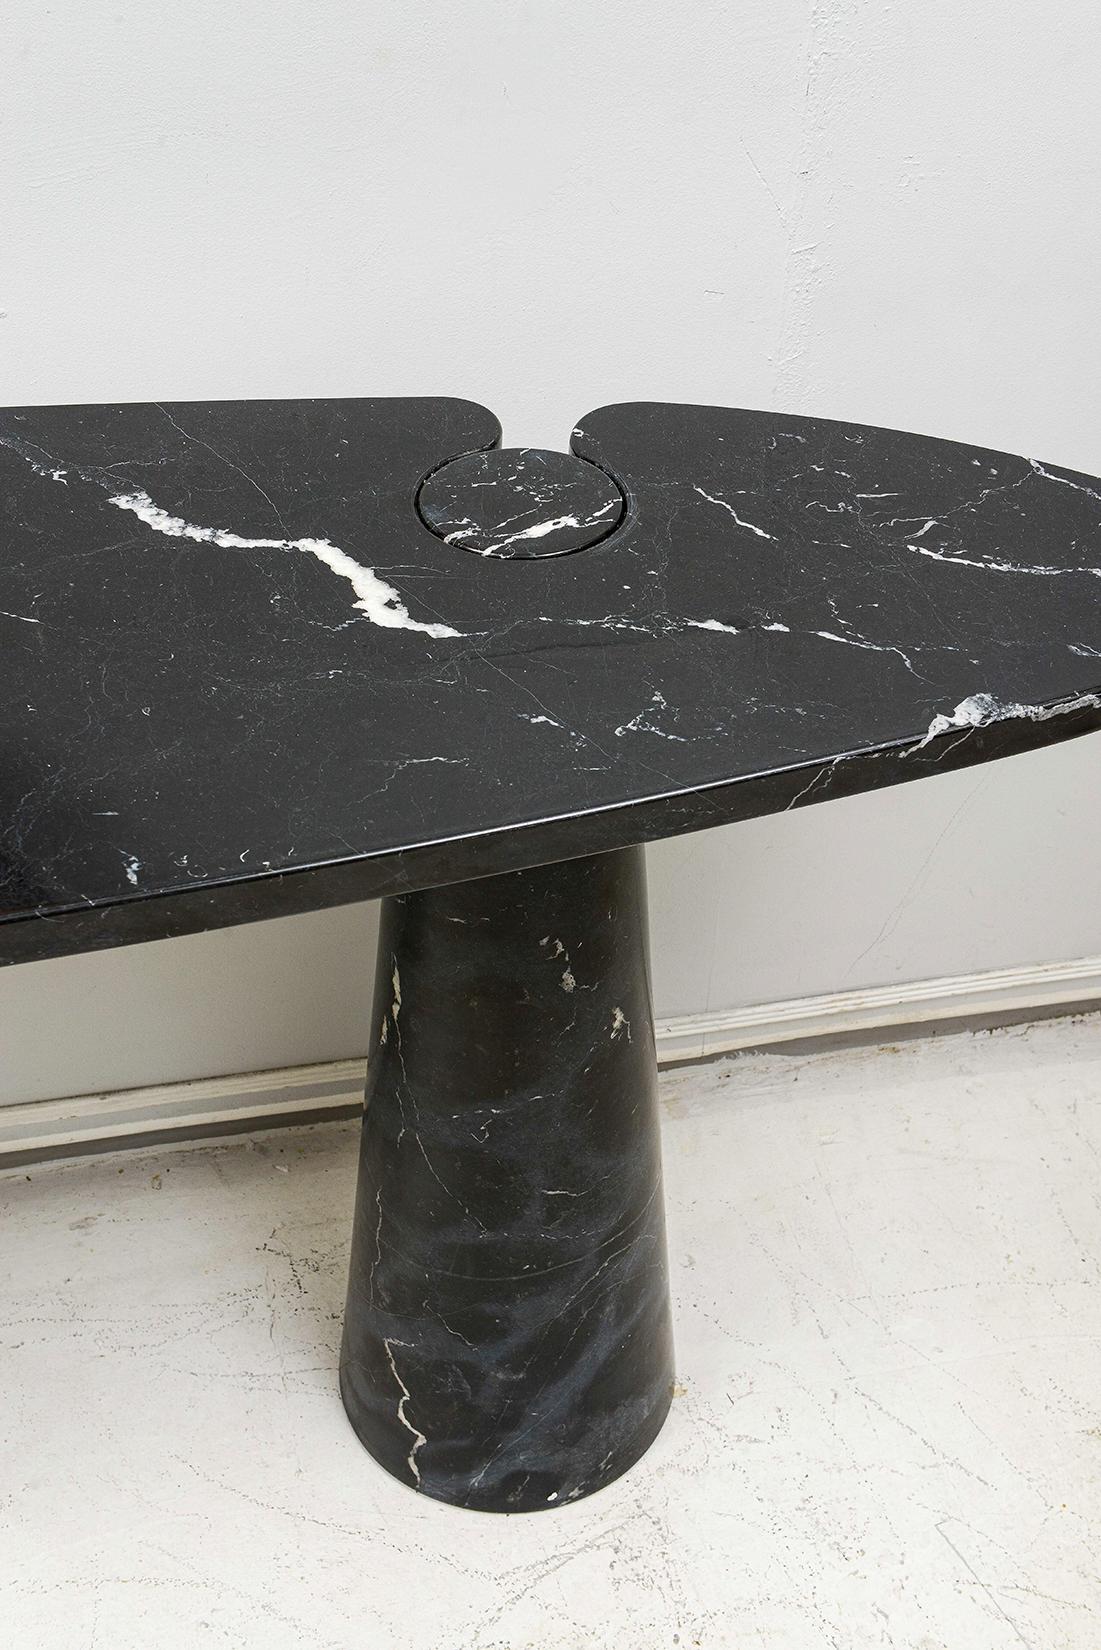 Marble Angelo Mangiarotti Console Table from the 